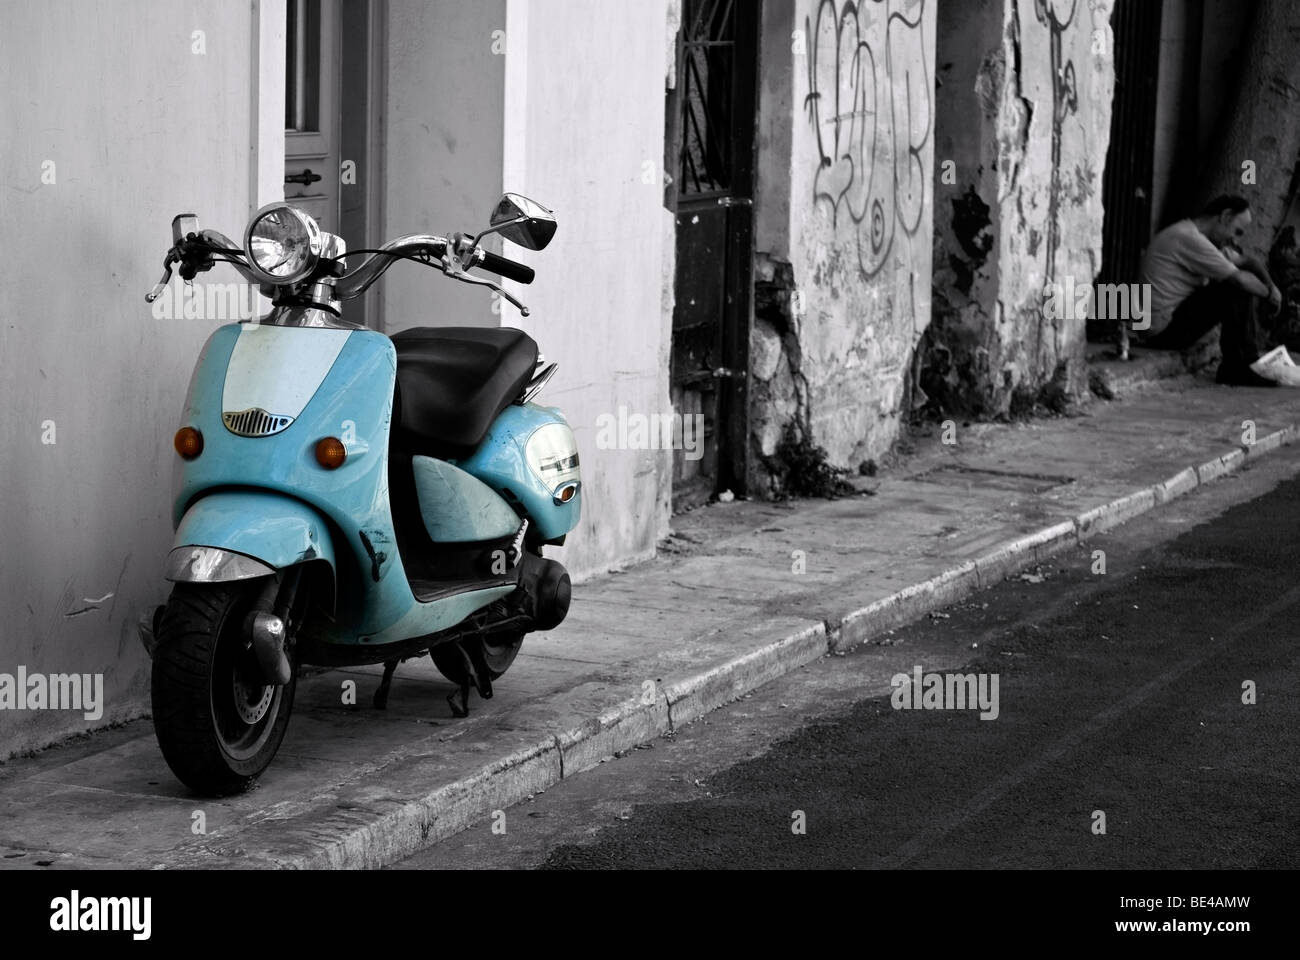 A light-blue scooter/vespa parked in an alley in Plaka, Athens, Greece Stock Photo